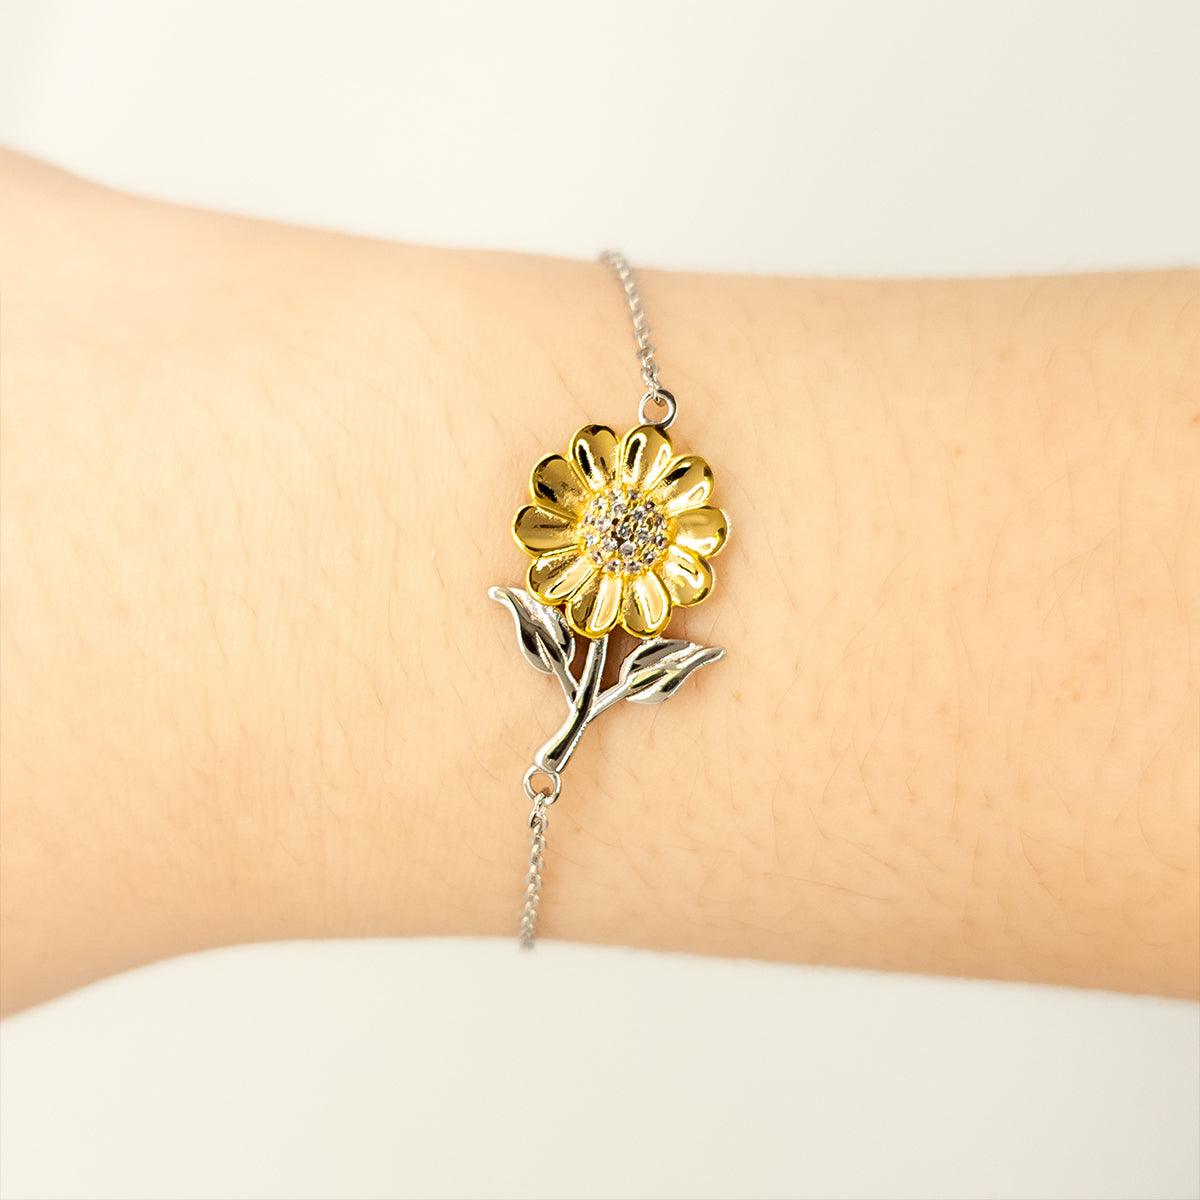 Motivational Soulmate Sunflower Bracelet - Always follow your dreams, never forget how amazing you are- Birthday, Christmas Holiday Gifts - Mallard Moon Gift Shop